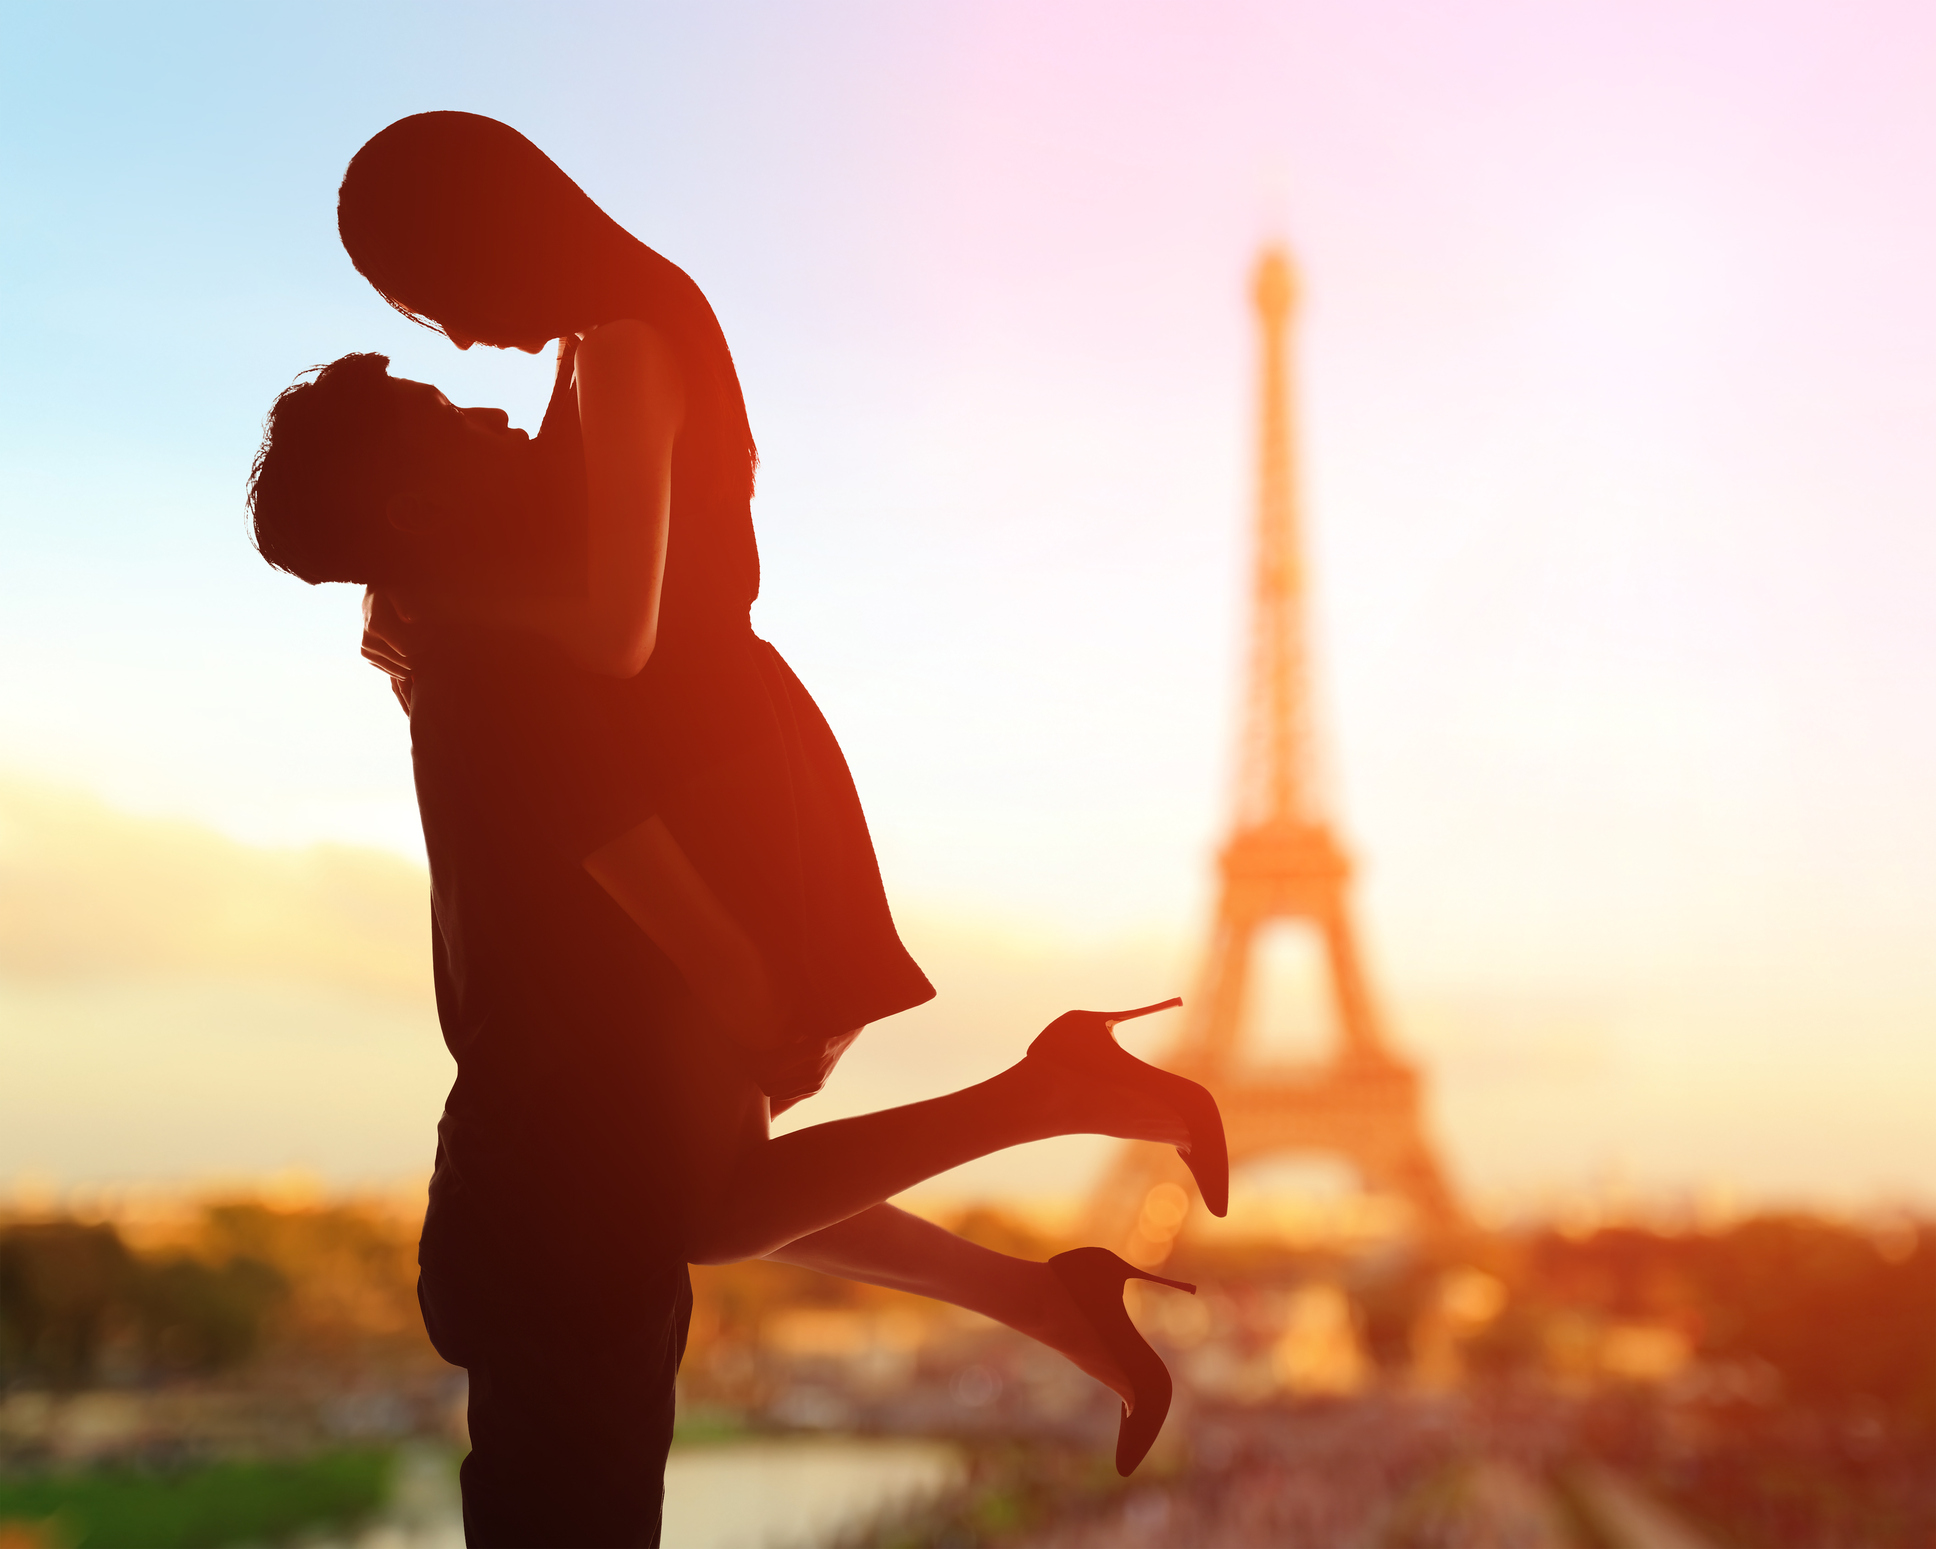 Romantic lovers with eiffel tower